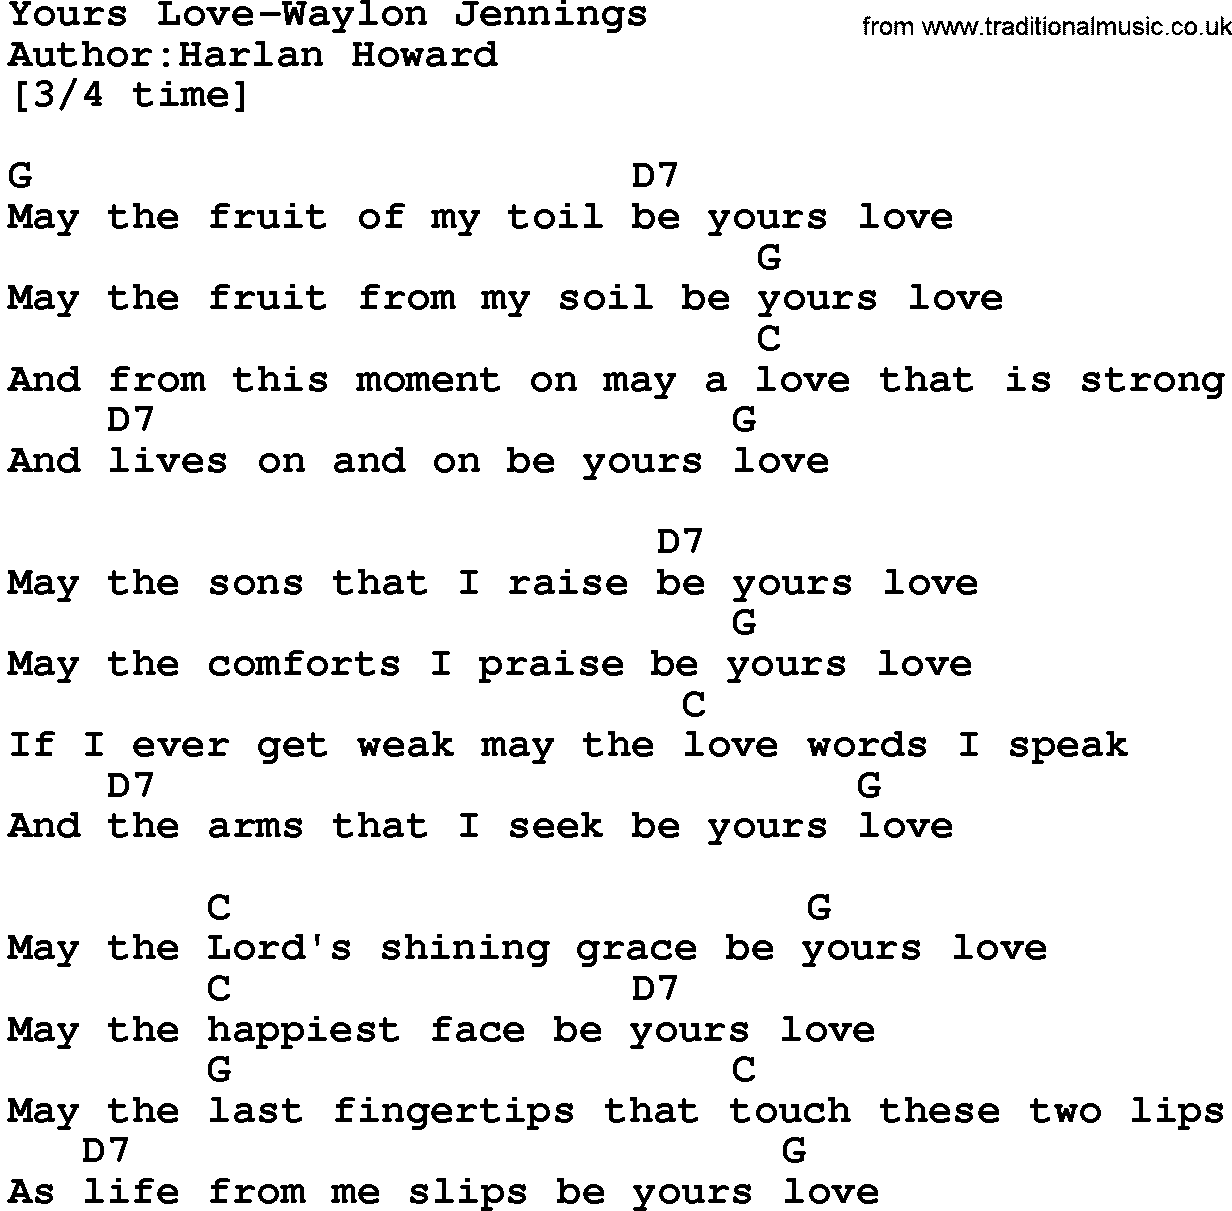 Country music song: Yours Love-Waylon Jennings lyrics and chords